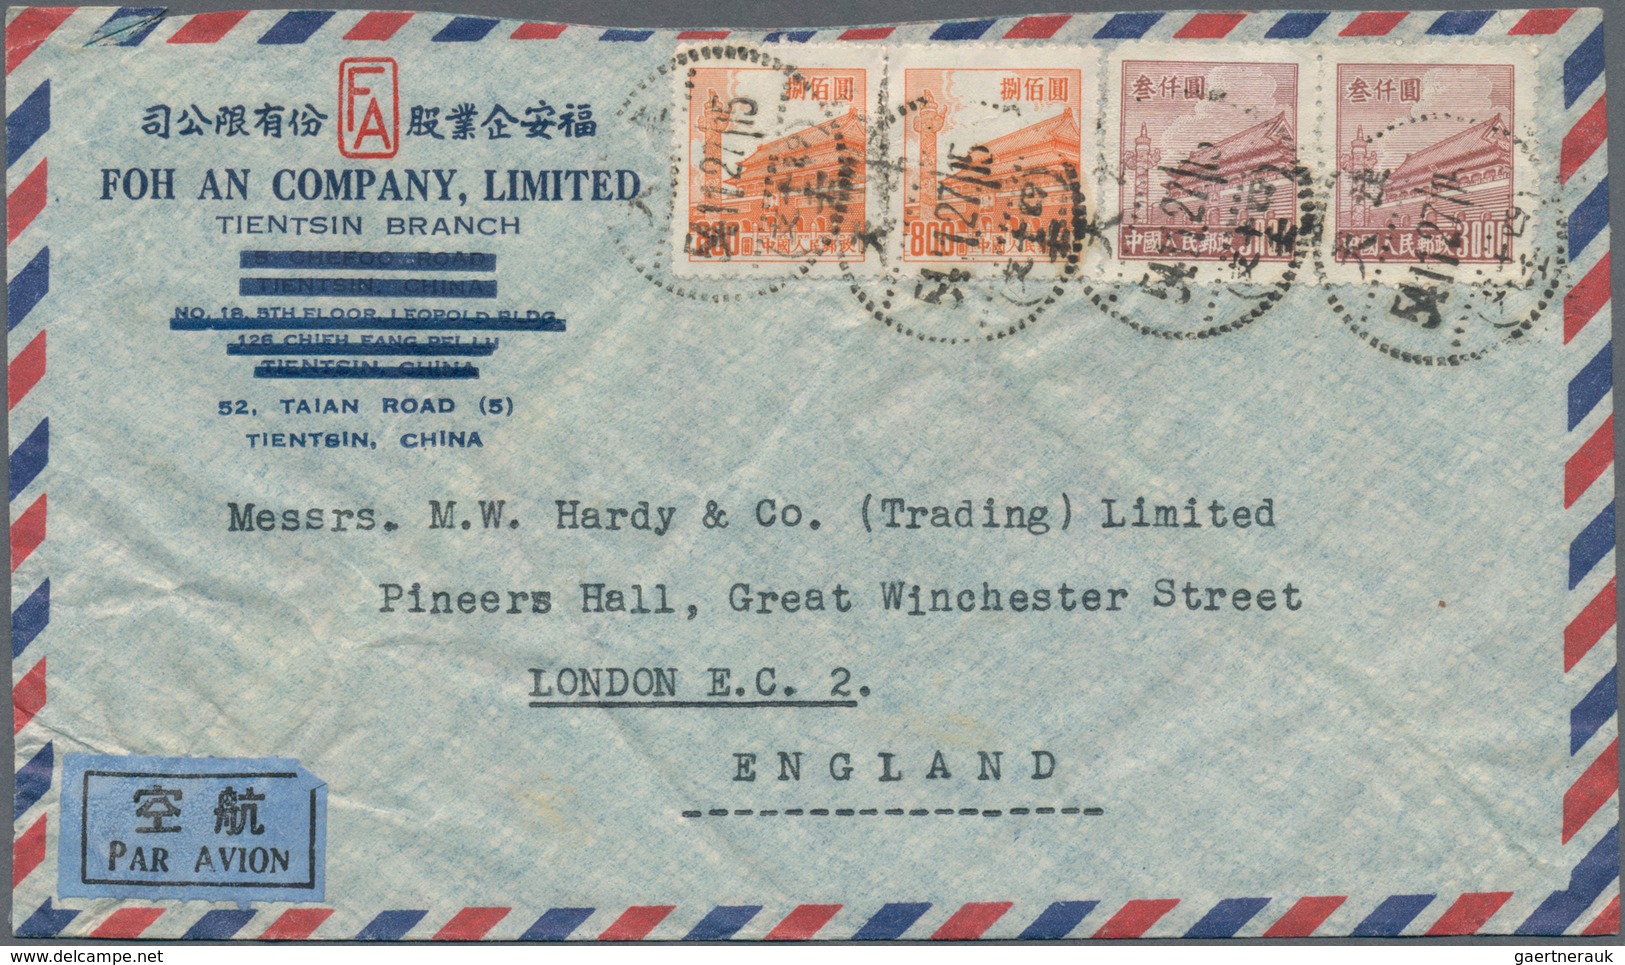 China - Volksrepublik: 1950/51, Tien AnMen issues up to $20.000 on airmail covers (6) all to Switzer